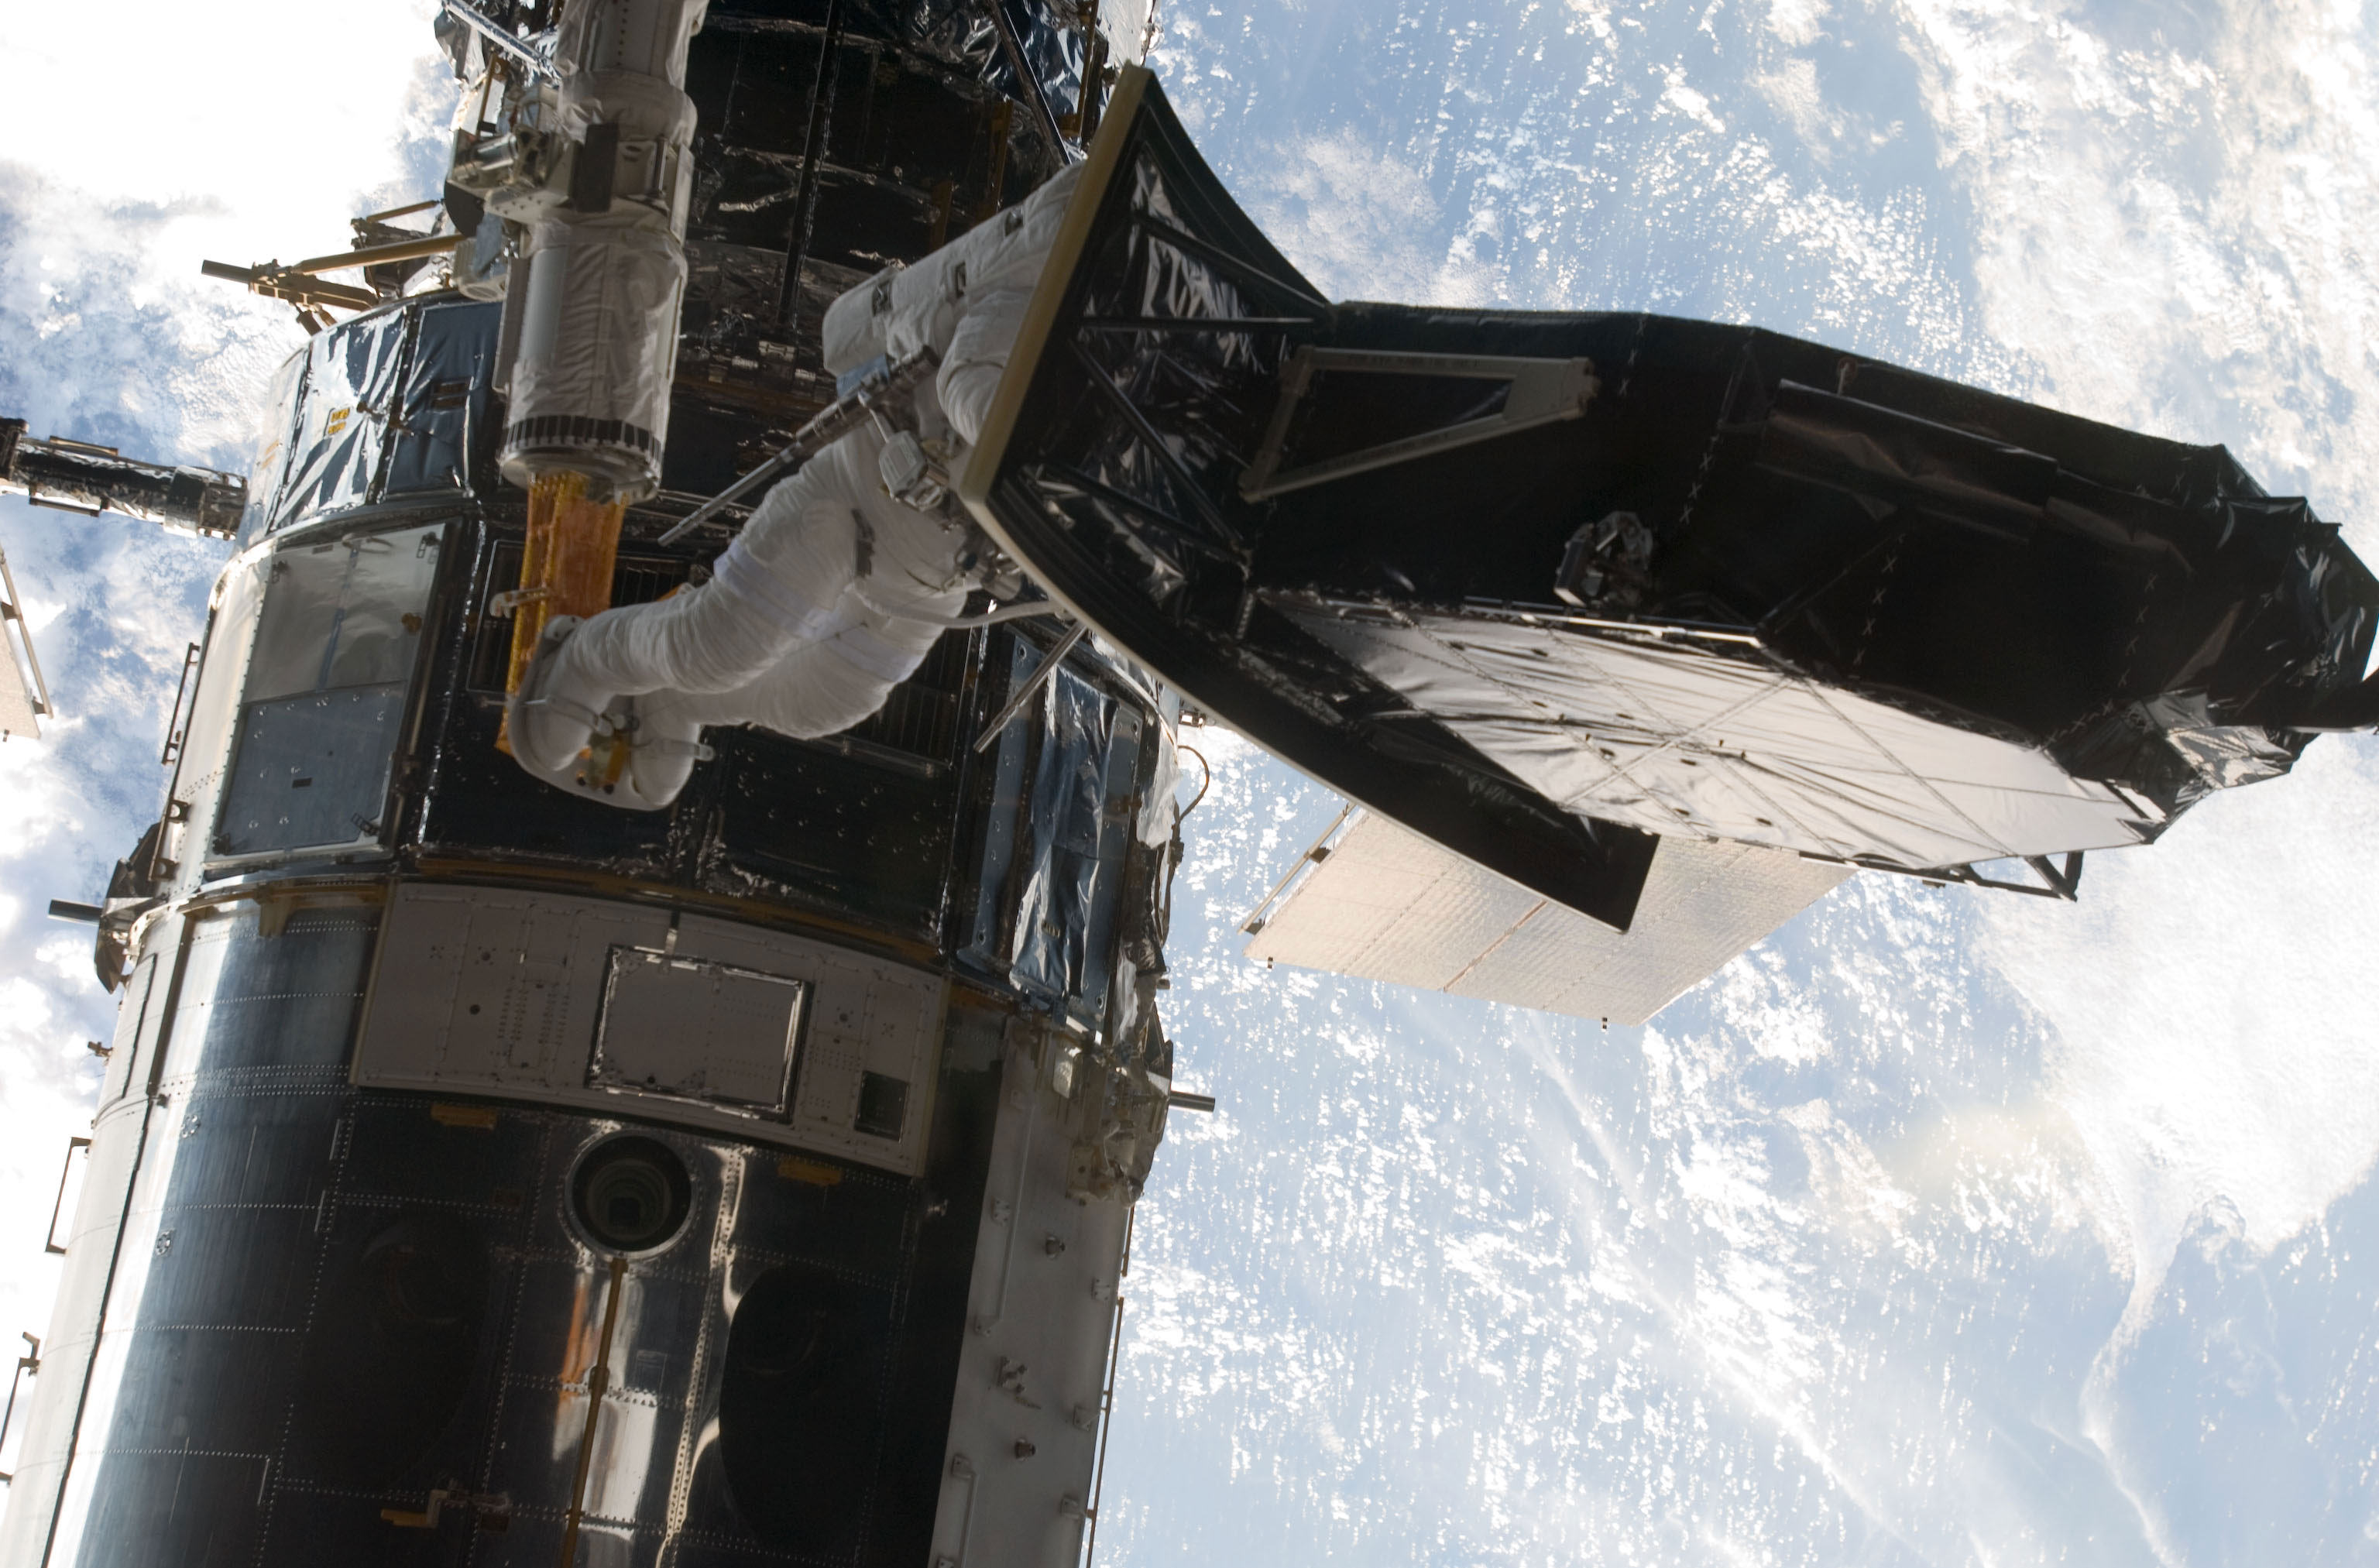 Image #5: But for the absence of gravity, astronaut Andrew Feustel, perched on the end of the remote manipulator system arm, would be a bit top heavy as he helps to install the Wide Field Camera 3 (WFC3) during a May 2009 spacewalk to upgrade the Hubble Space Telescope. Out of frame is veteran astronaut John Grunsfeld, his spacewalking crewmate. The pair kicked off five back to back days of extravehicular activity for the STS-125 crew. Credit: NASA